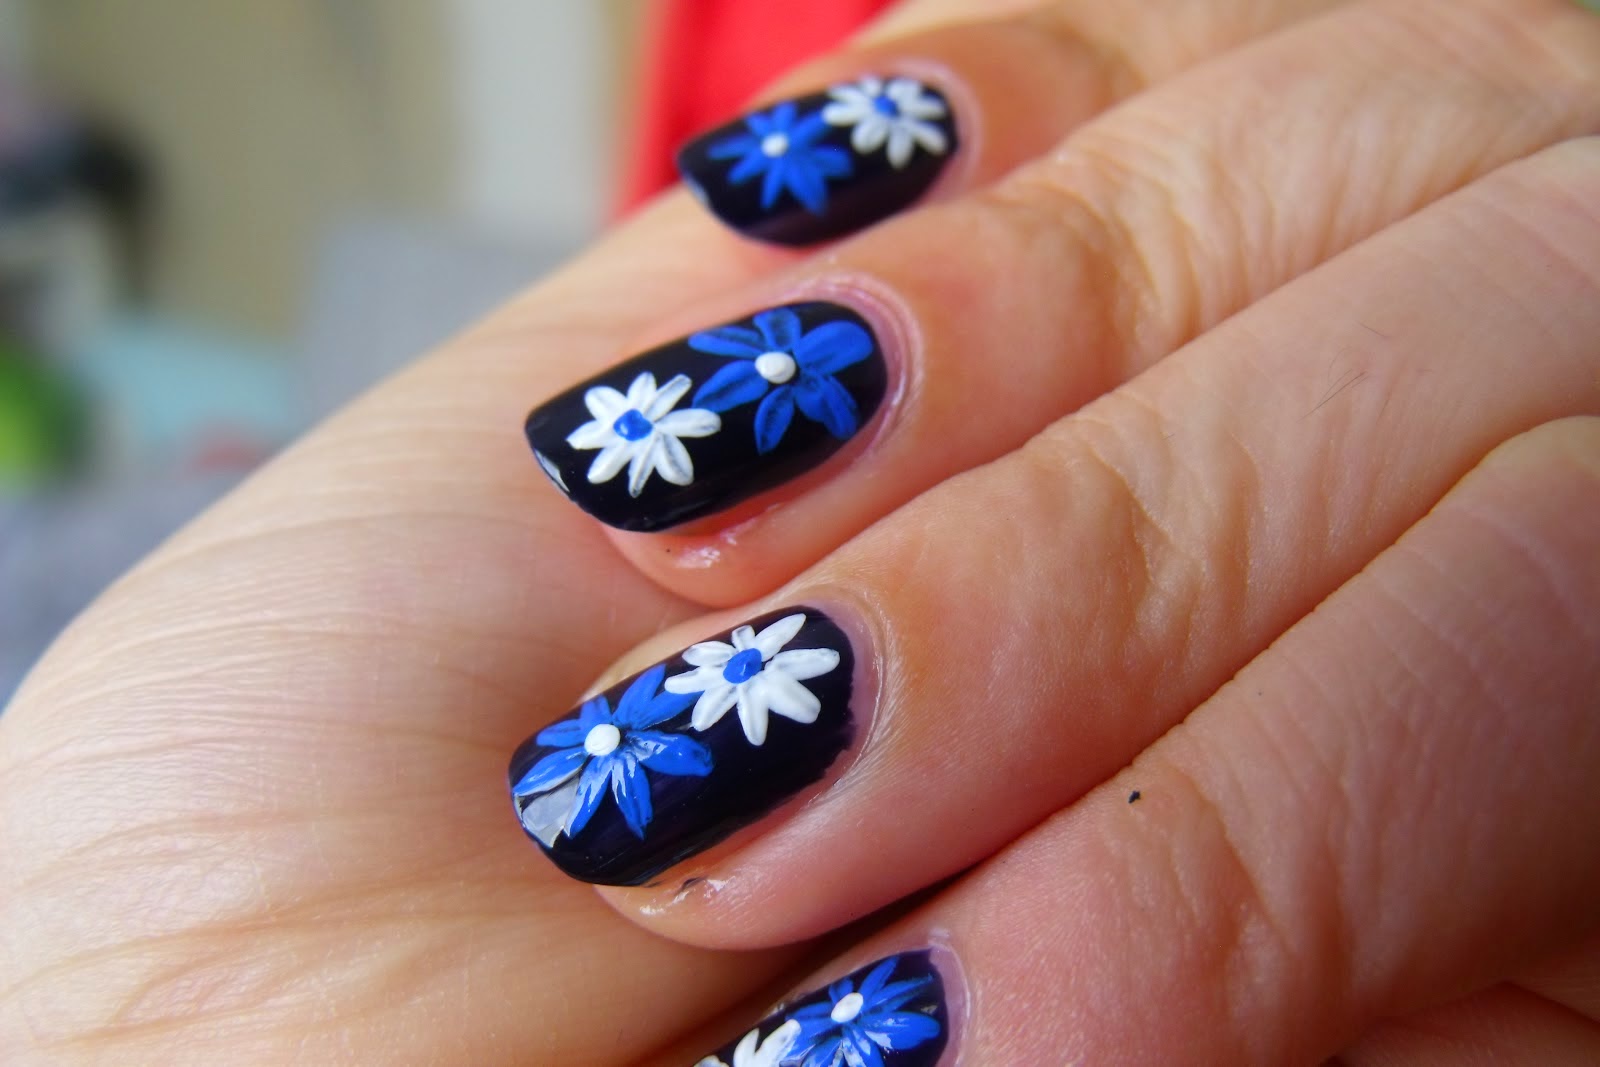 Stunning Nail Art Ideas for Any Occasion - wide 2